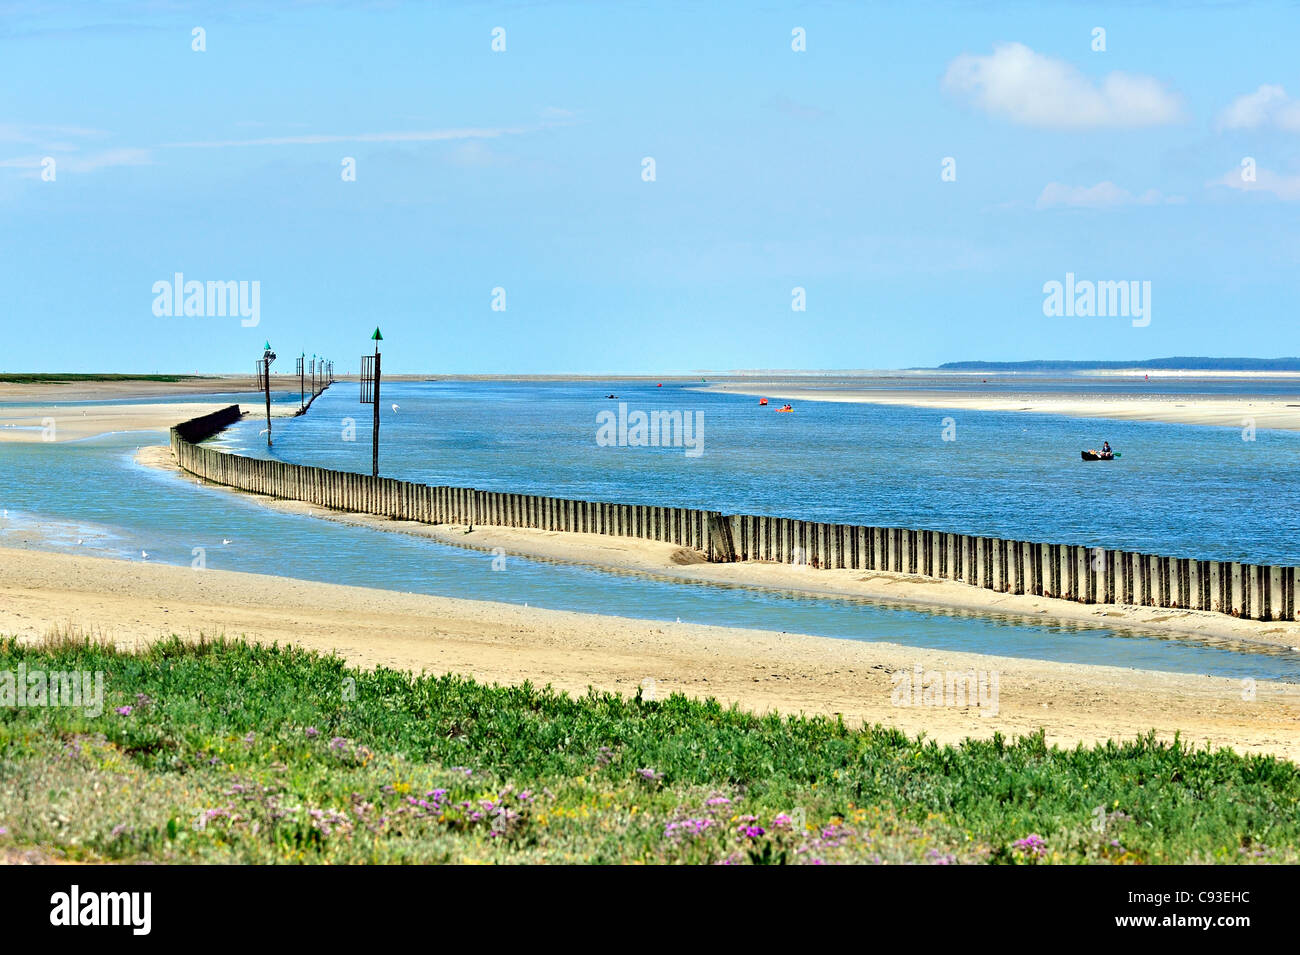 The estuary of the river Somme at Saint Valery sur mer, France. Stock Photo